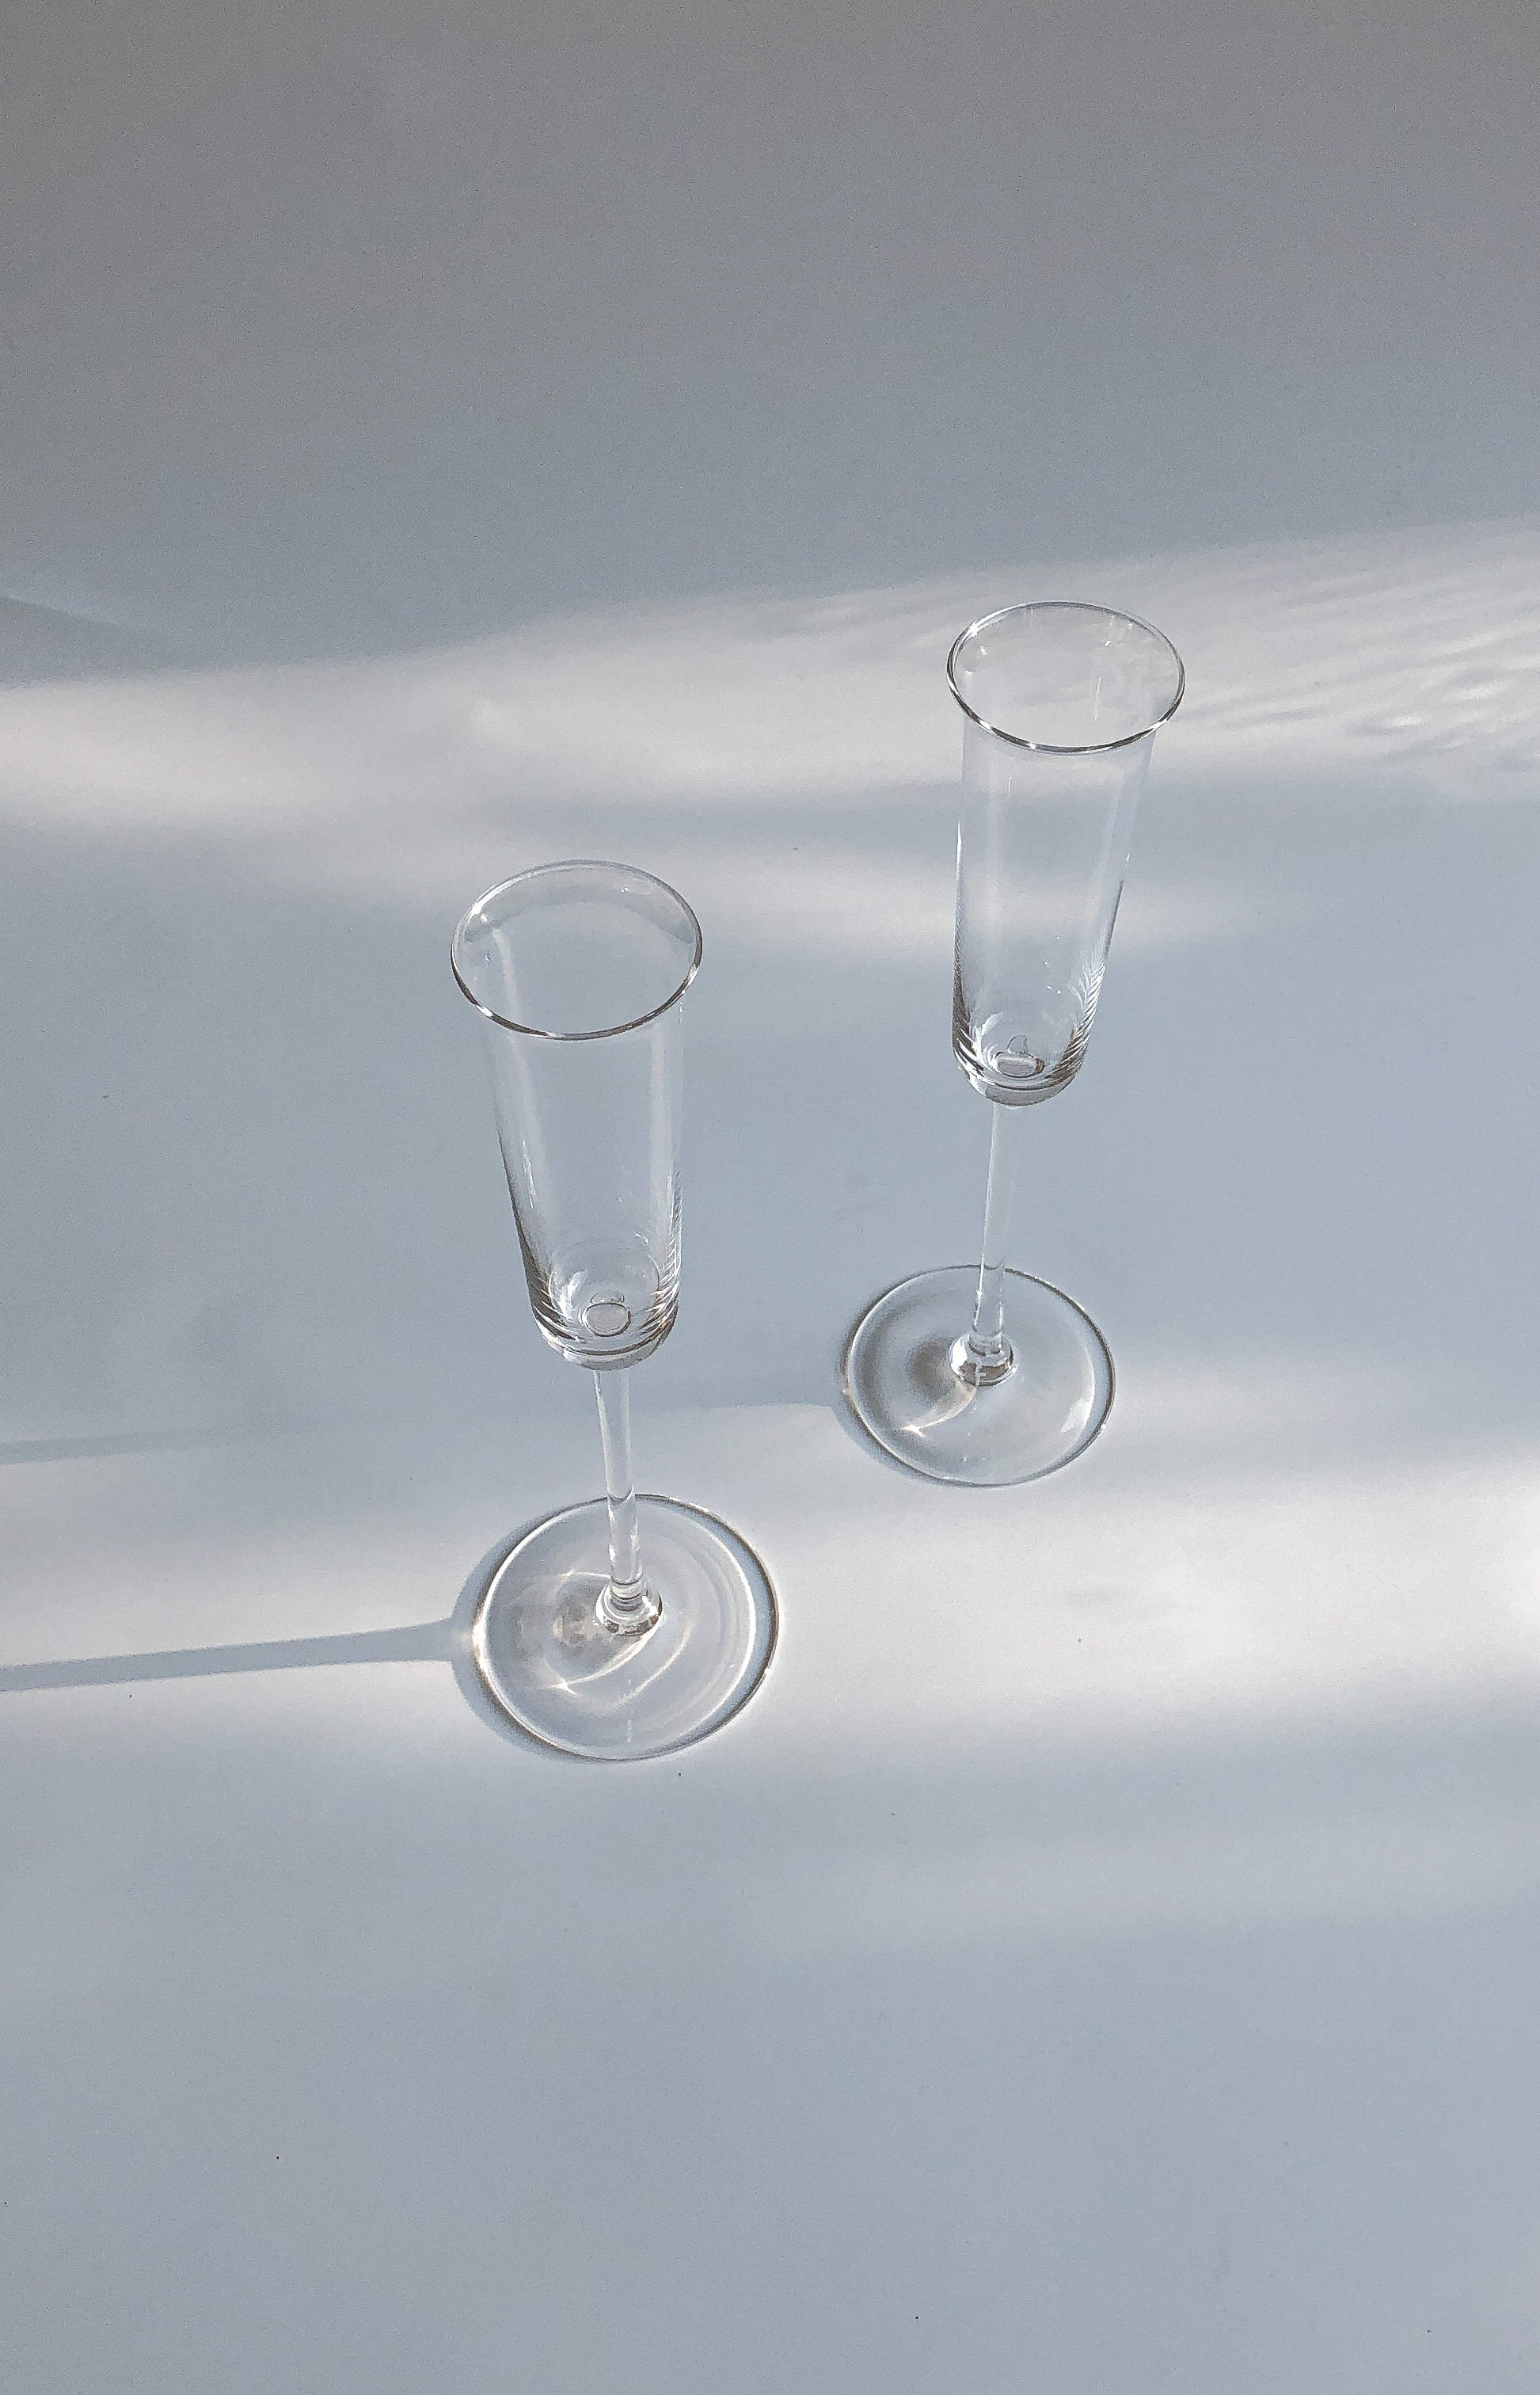 Grace Champagne Flute by PROSE Tabletop